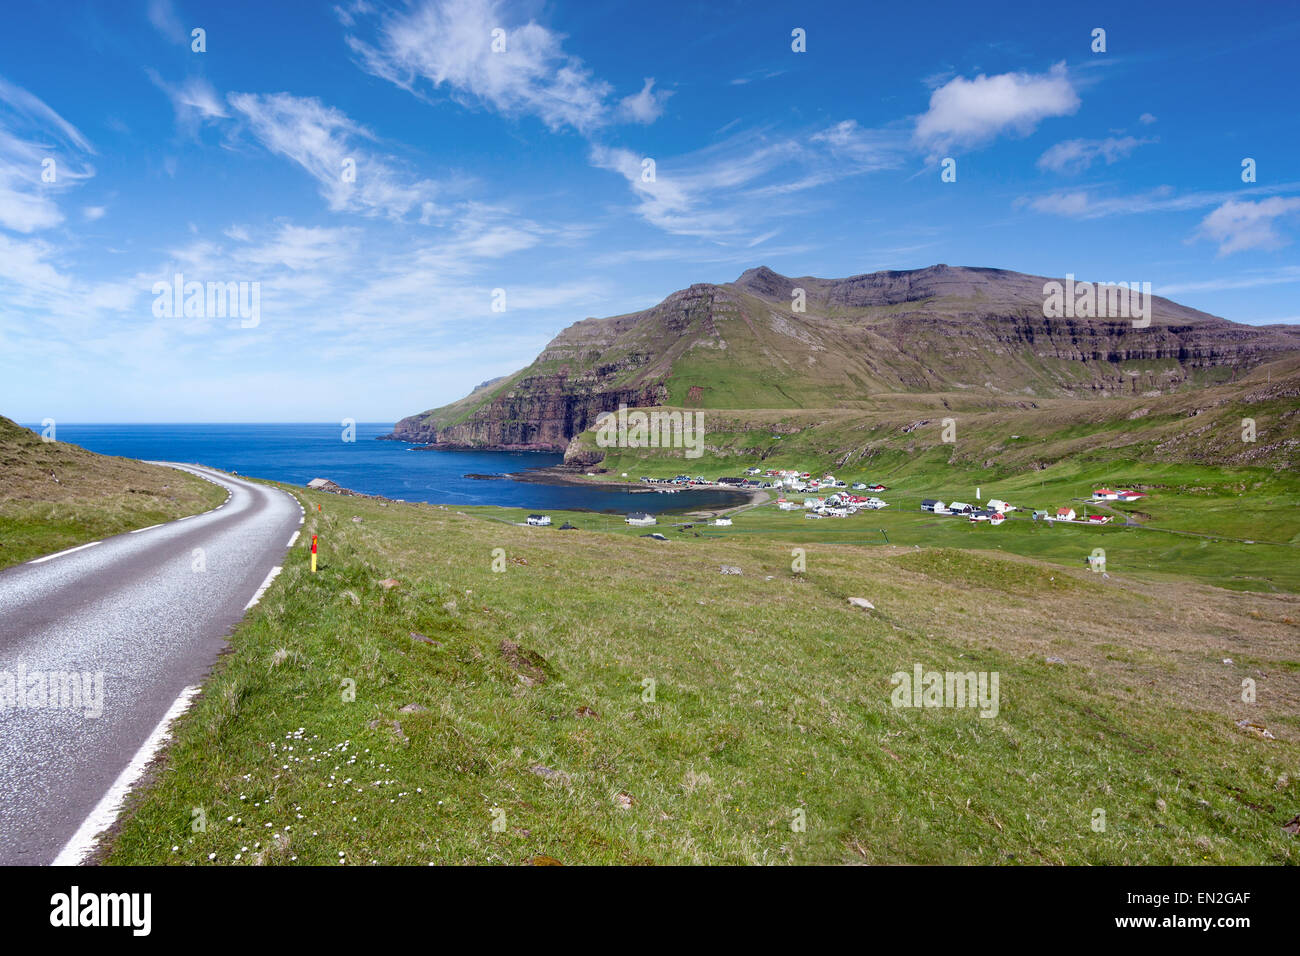 Faroe Islands, empty road leading to a wonderful bay surrounded by unspoilt nature Stock Photo